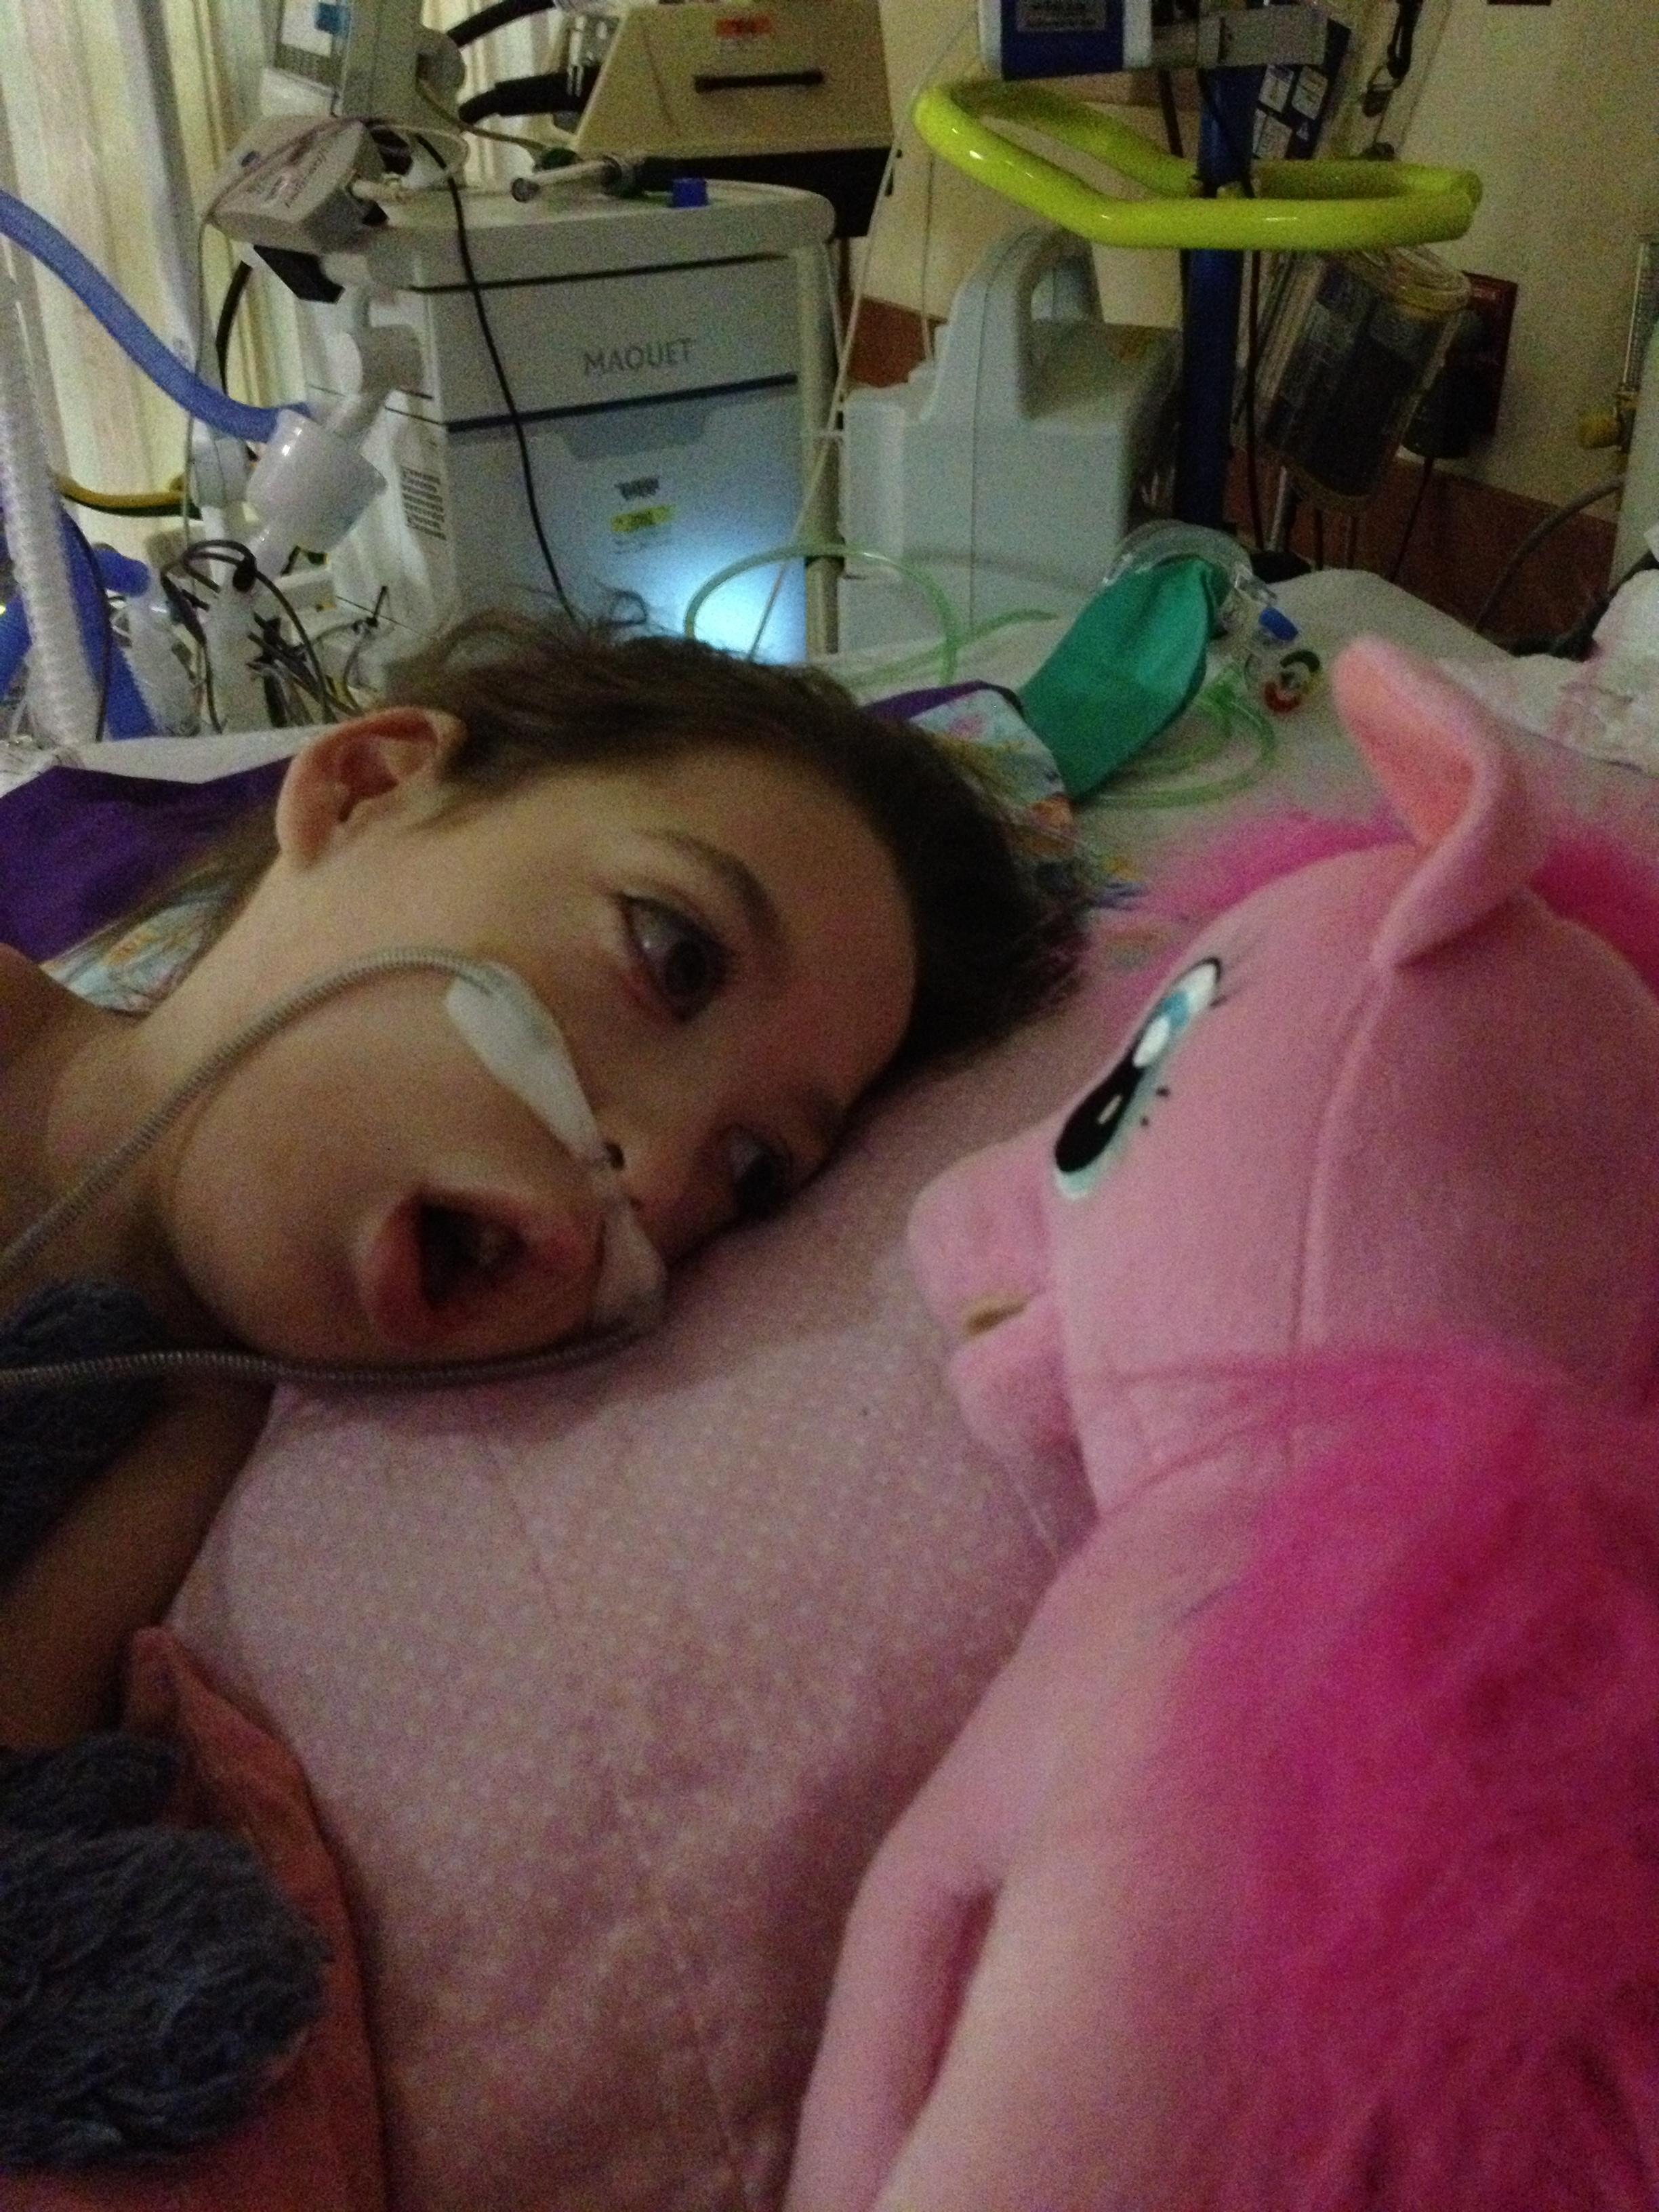 The author's daughter next to a stuffed pink unicorn